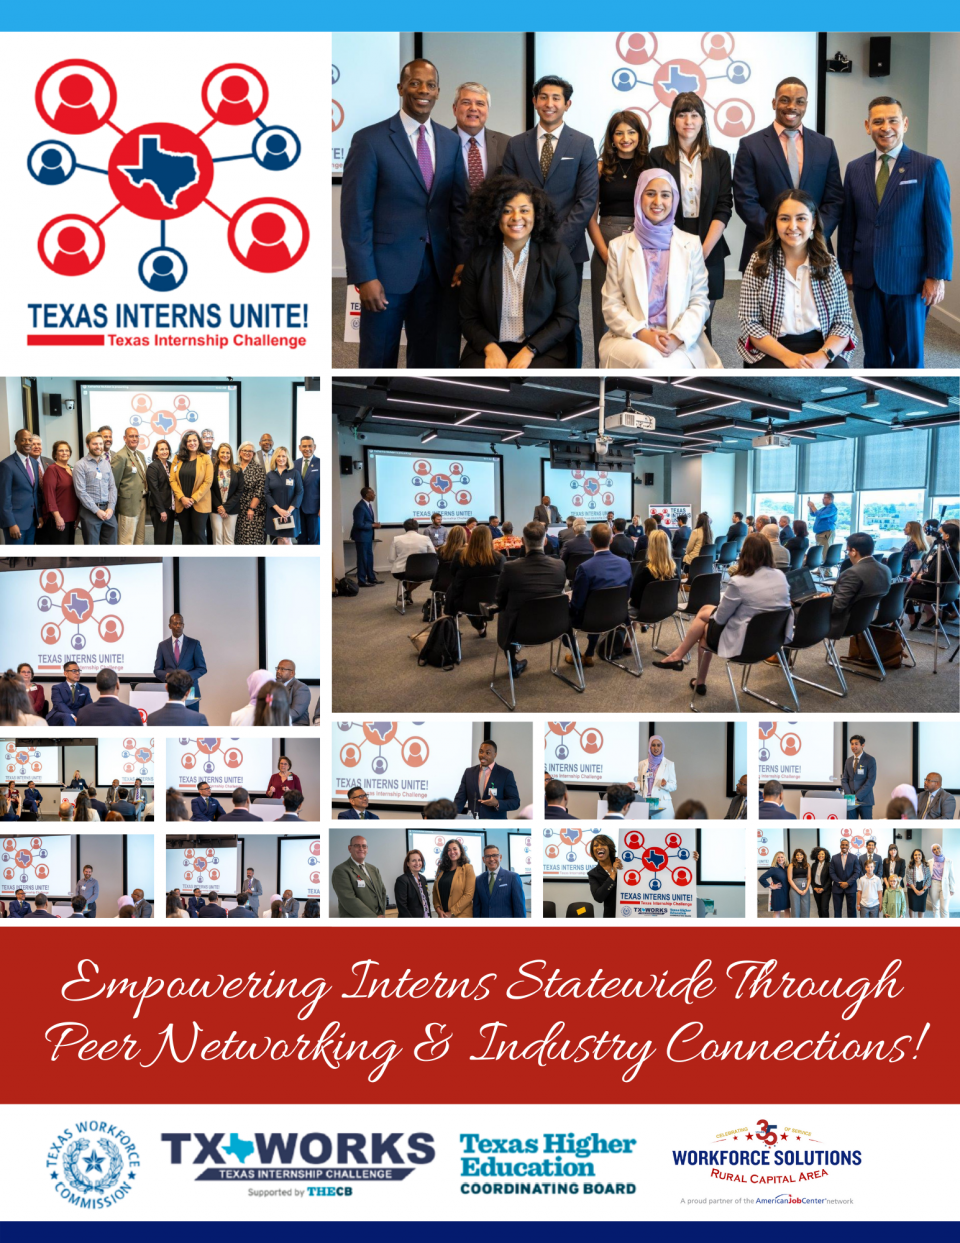 WSRCA Joins with TWC for Kickoff of 'Texas Interns Unite!' Initiative to Build Internship Connections